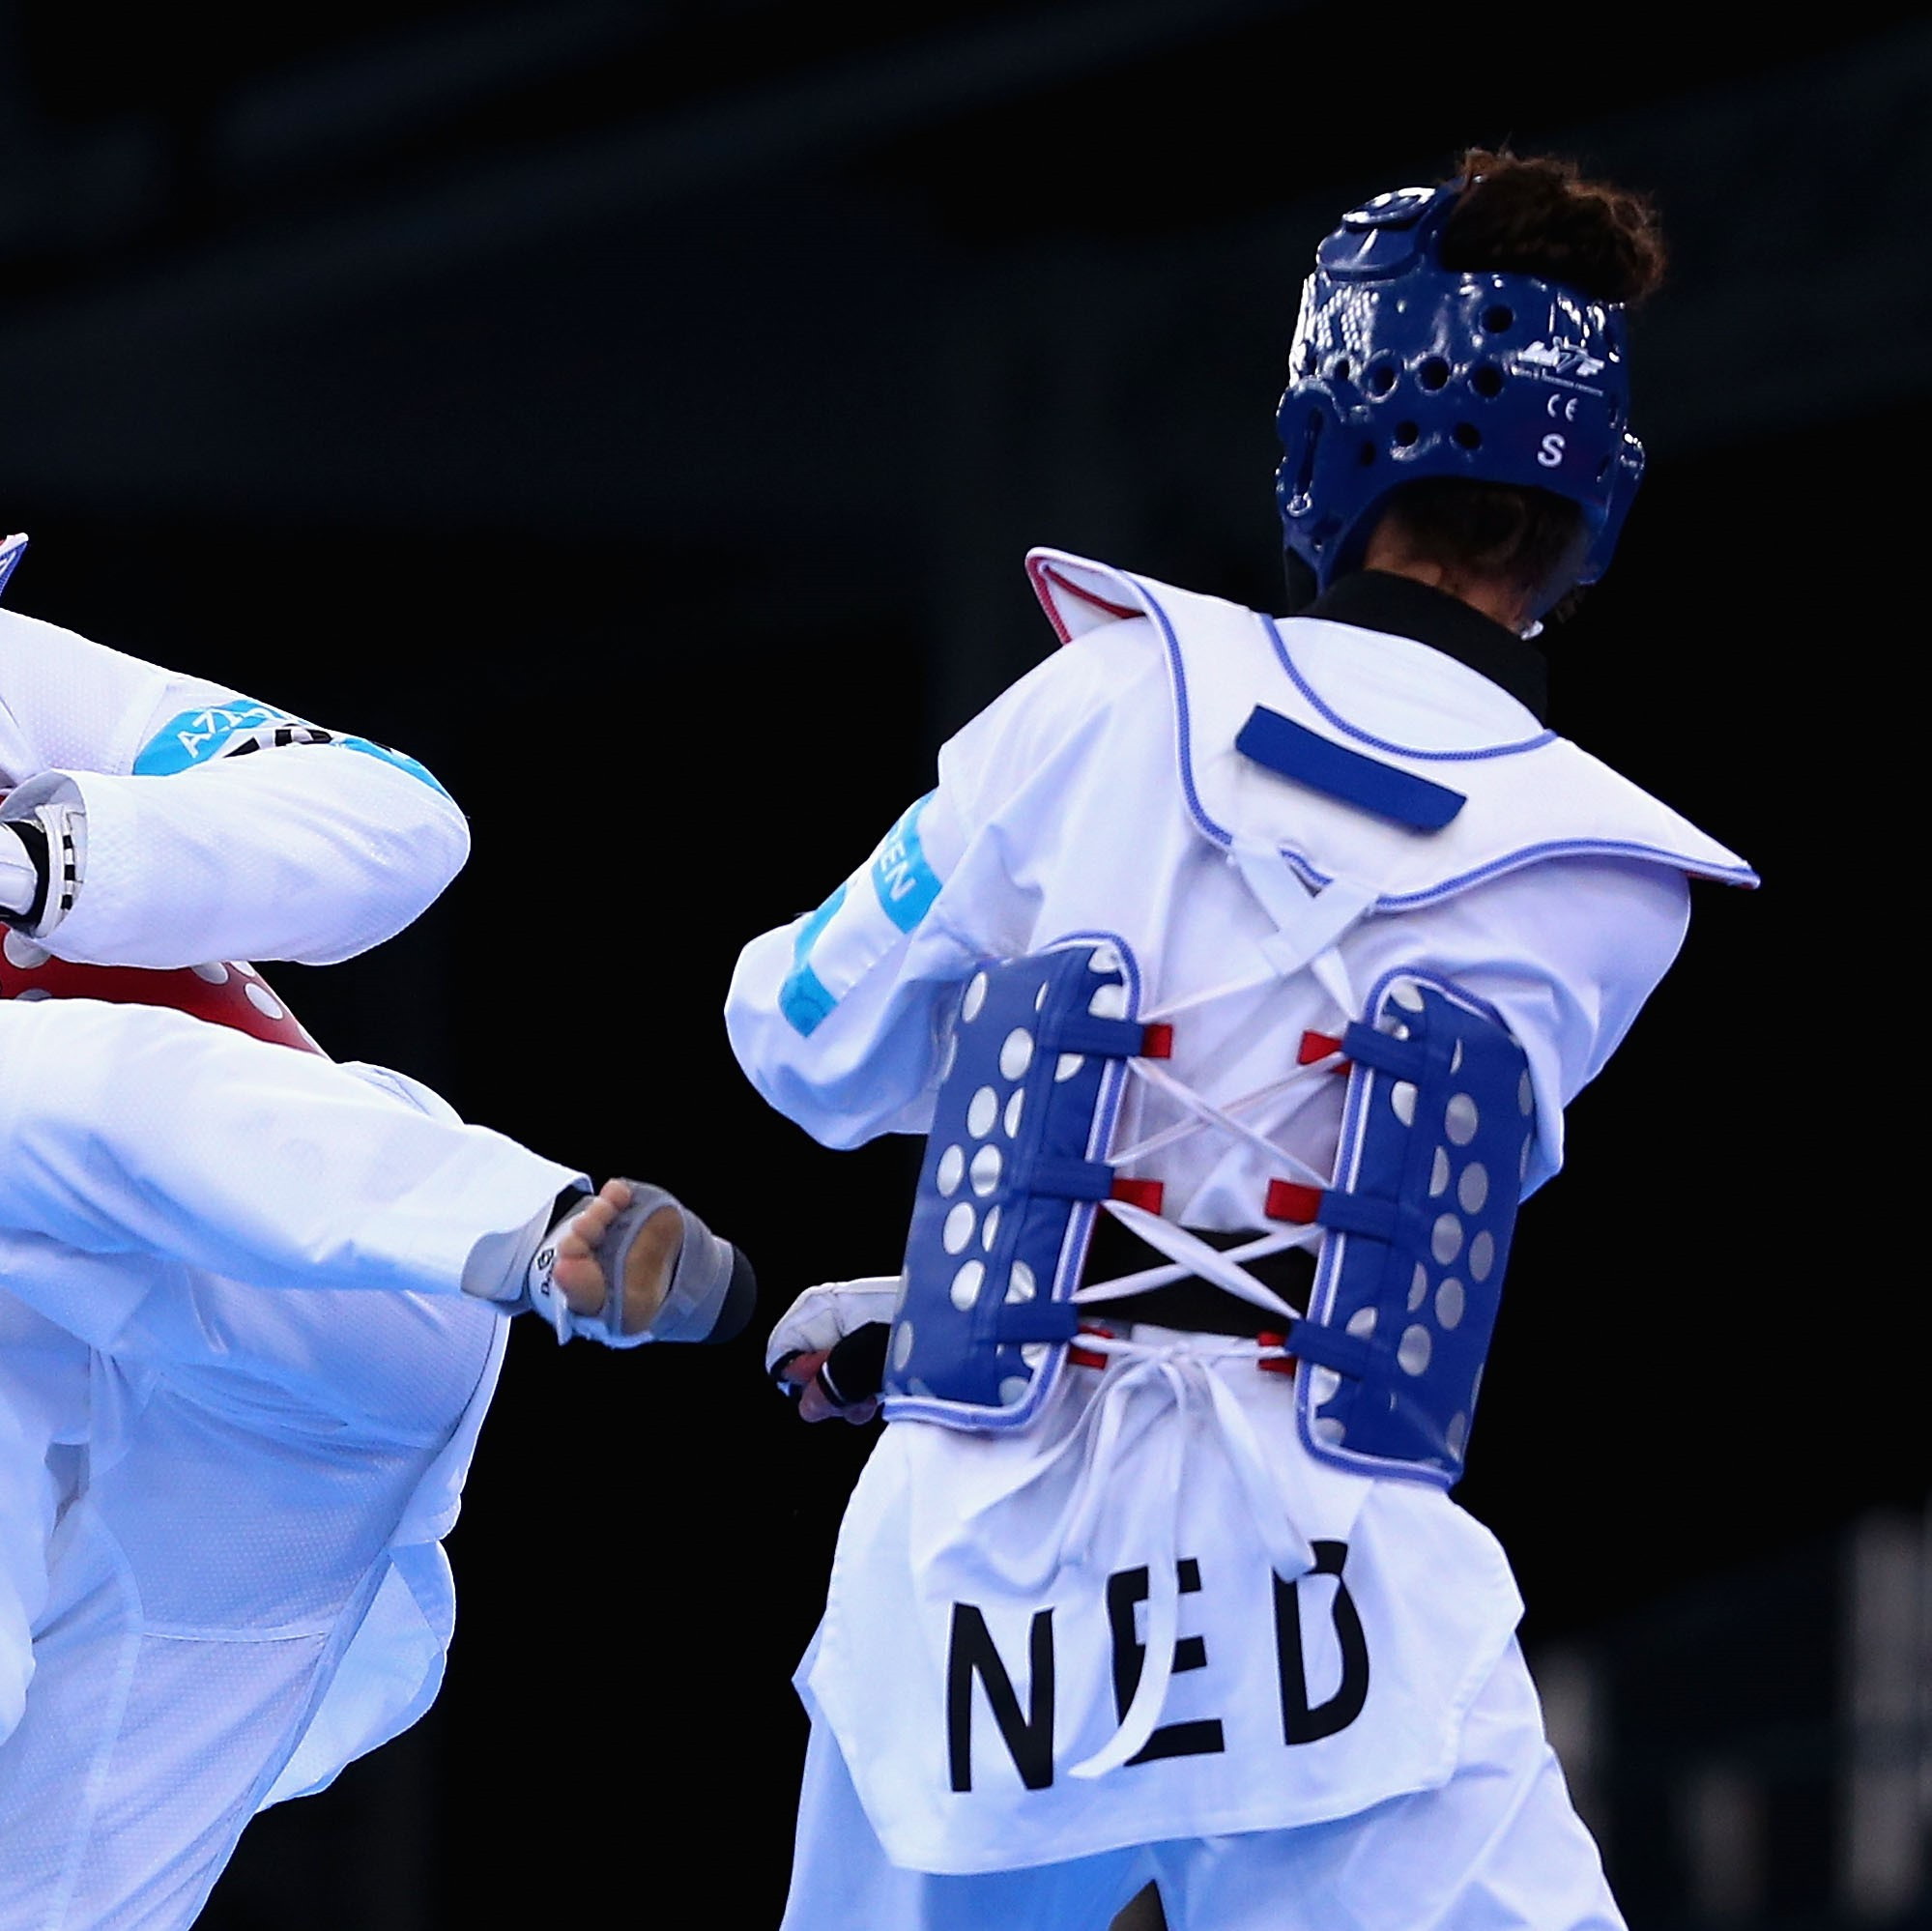 Taekwondo Federation Netherlands commits to diversity charter, boosting women in leadership roles